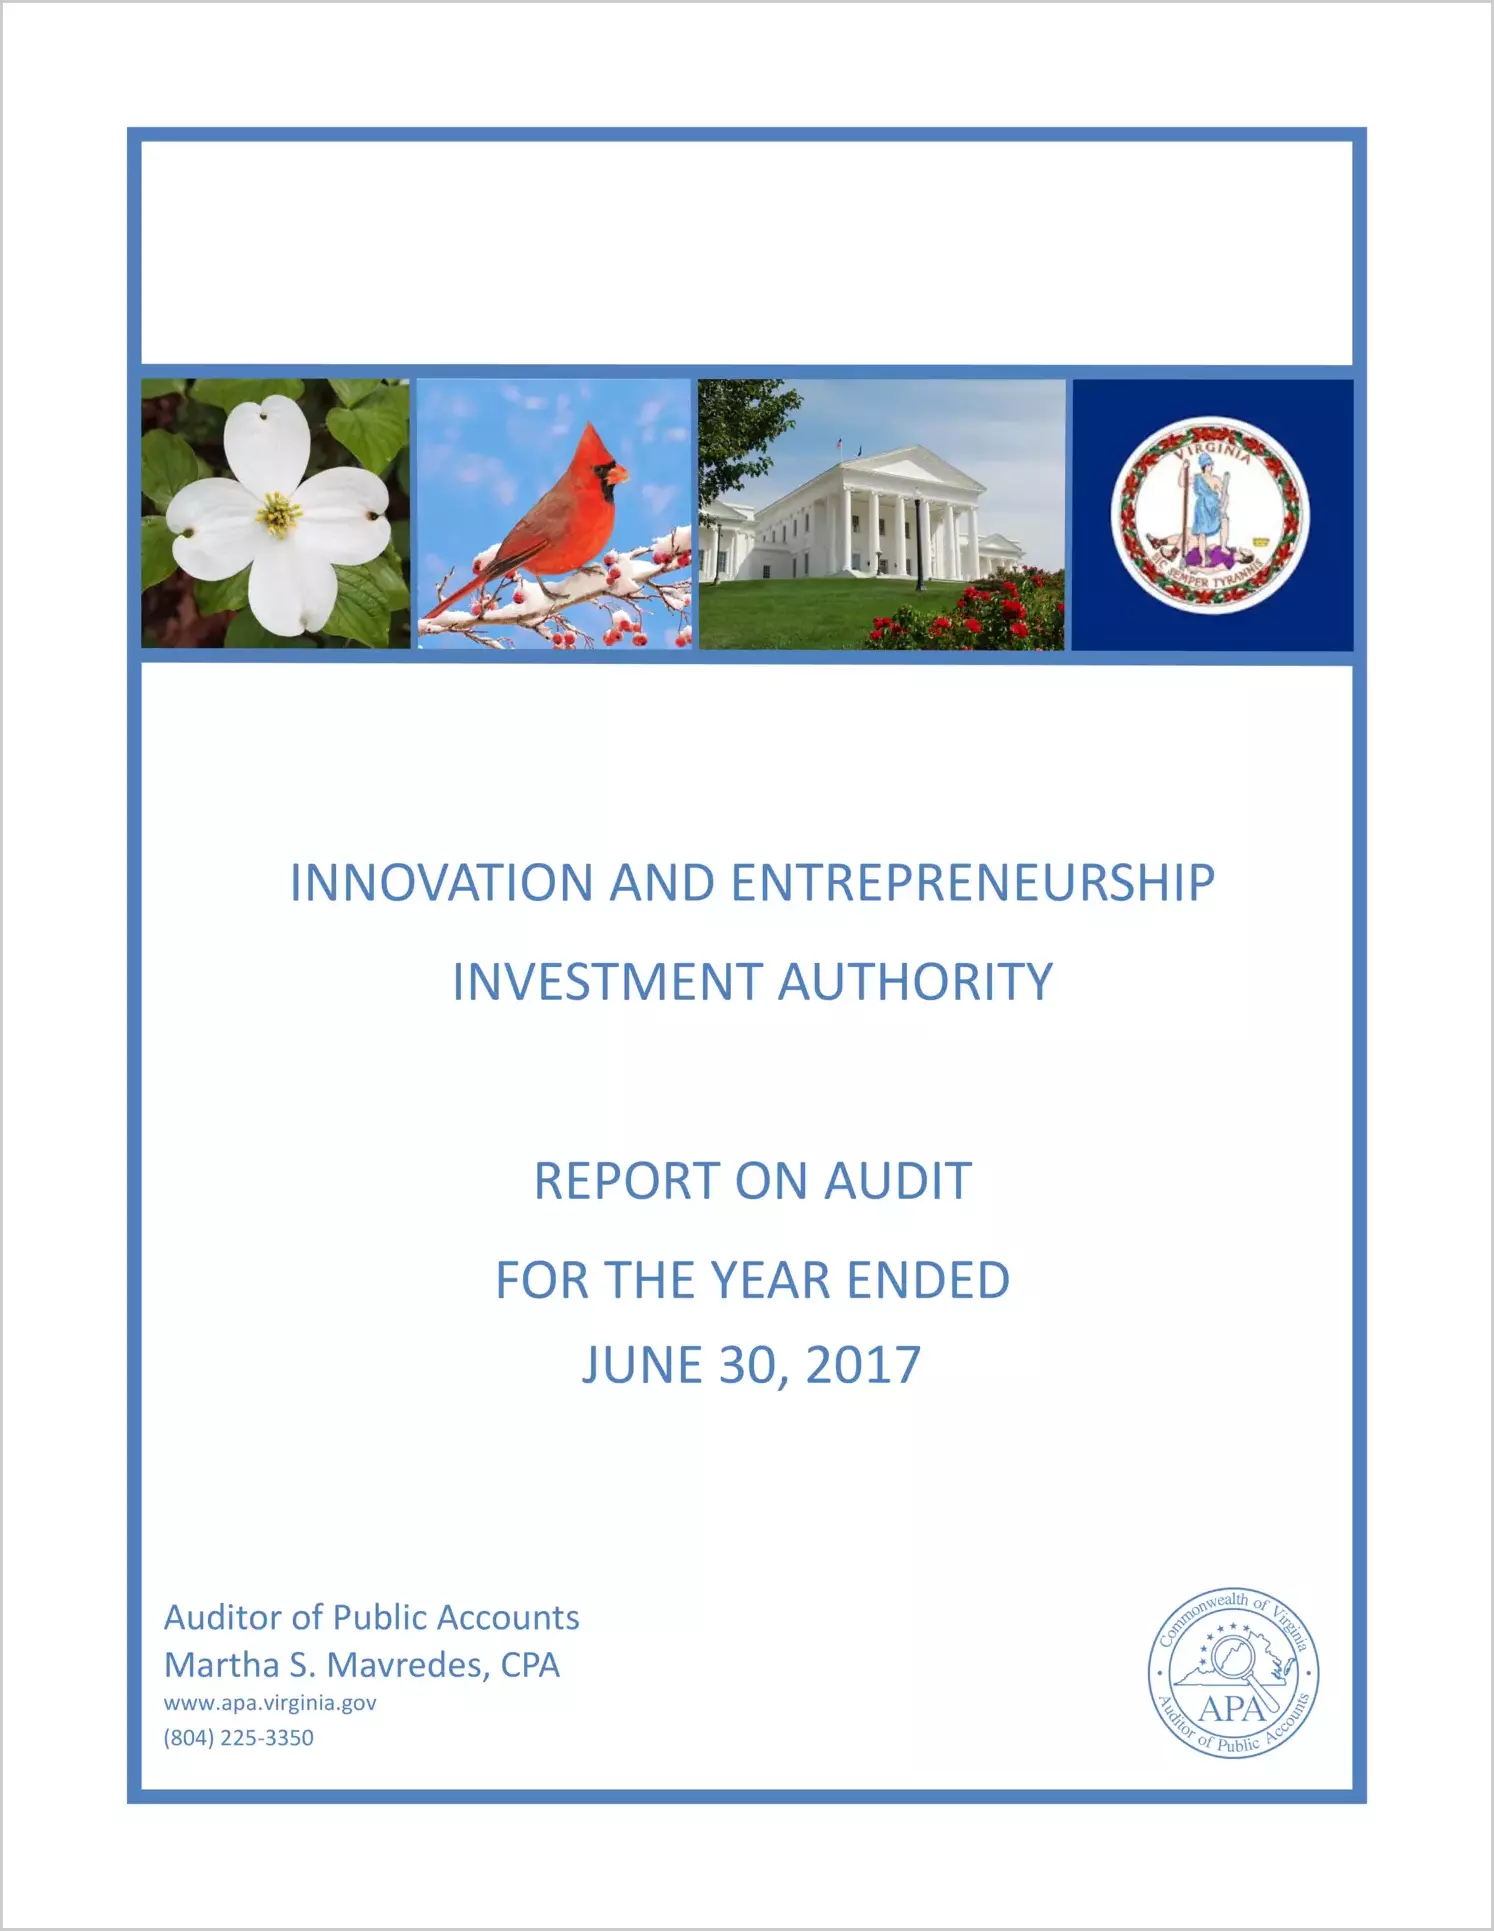 Innovation and Entrepreneurship Investment Authority for the year ended June 30, 2017